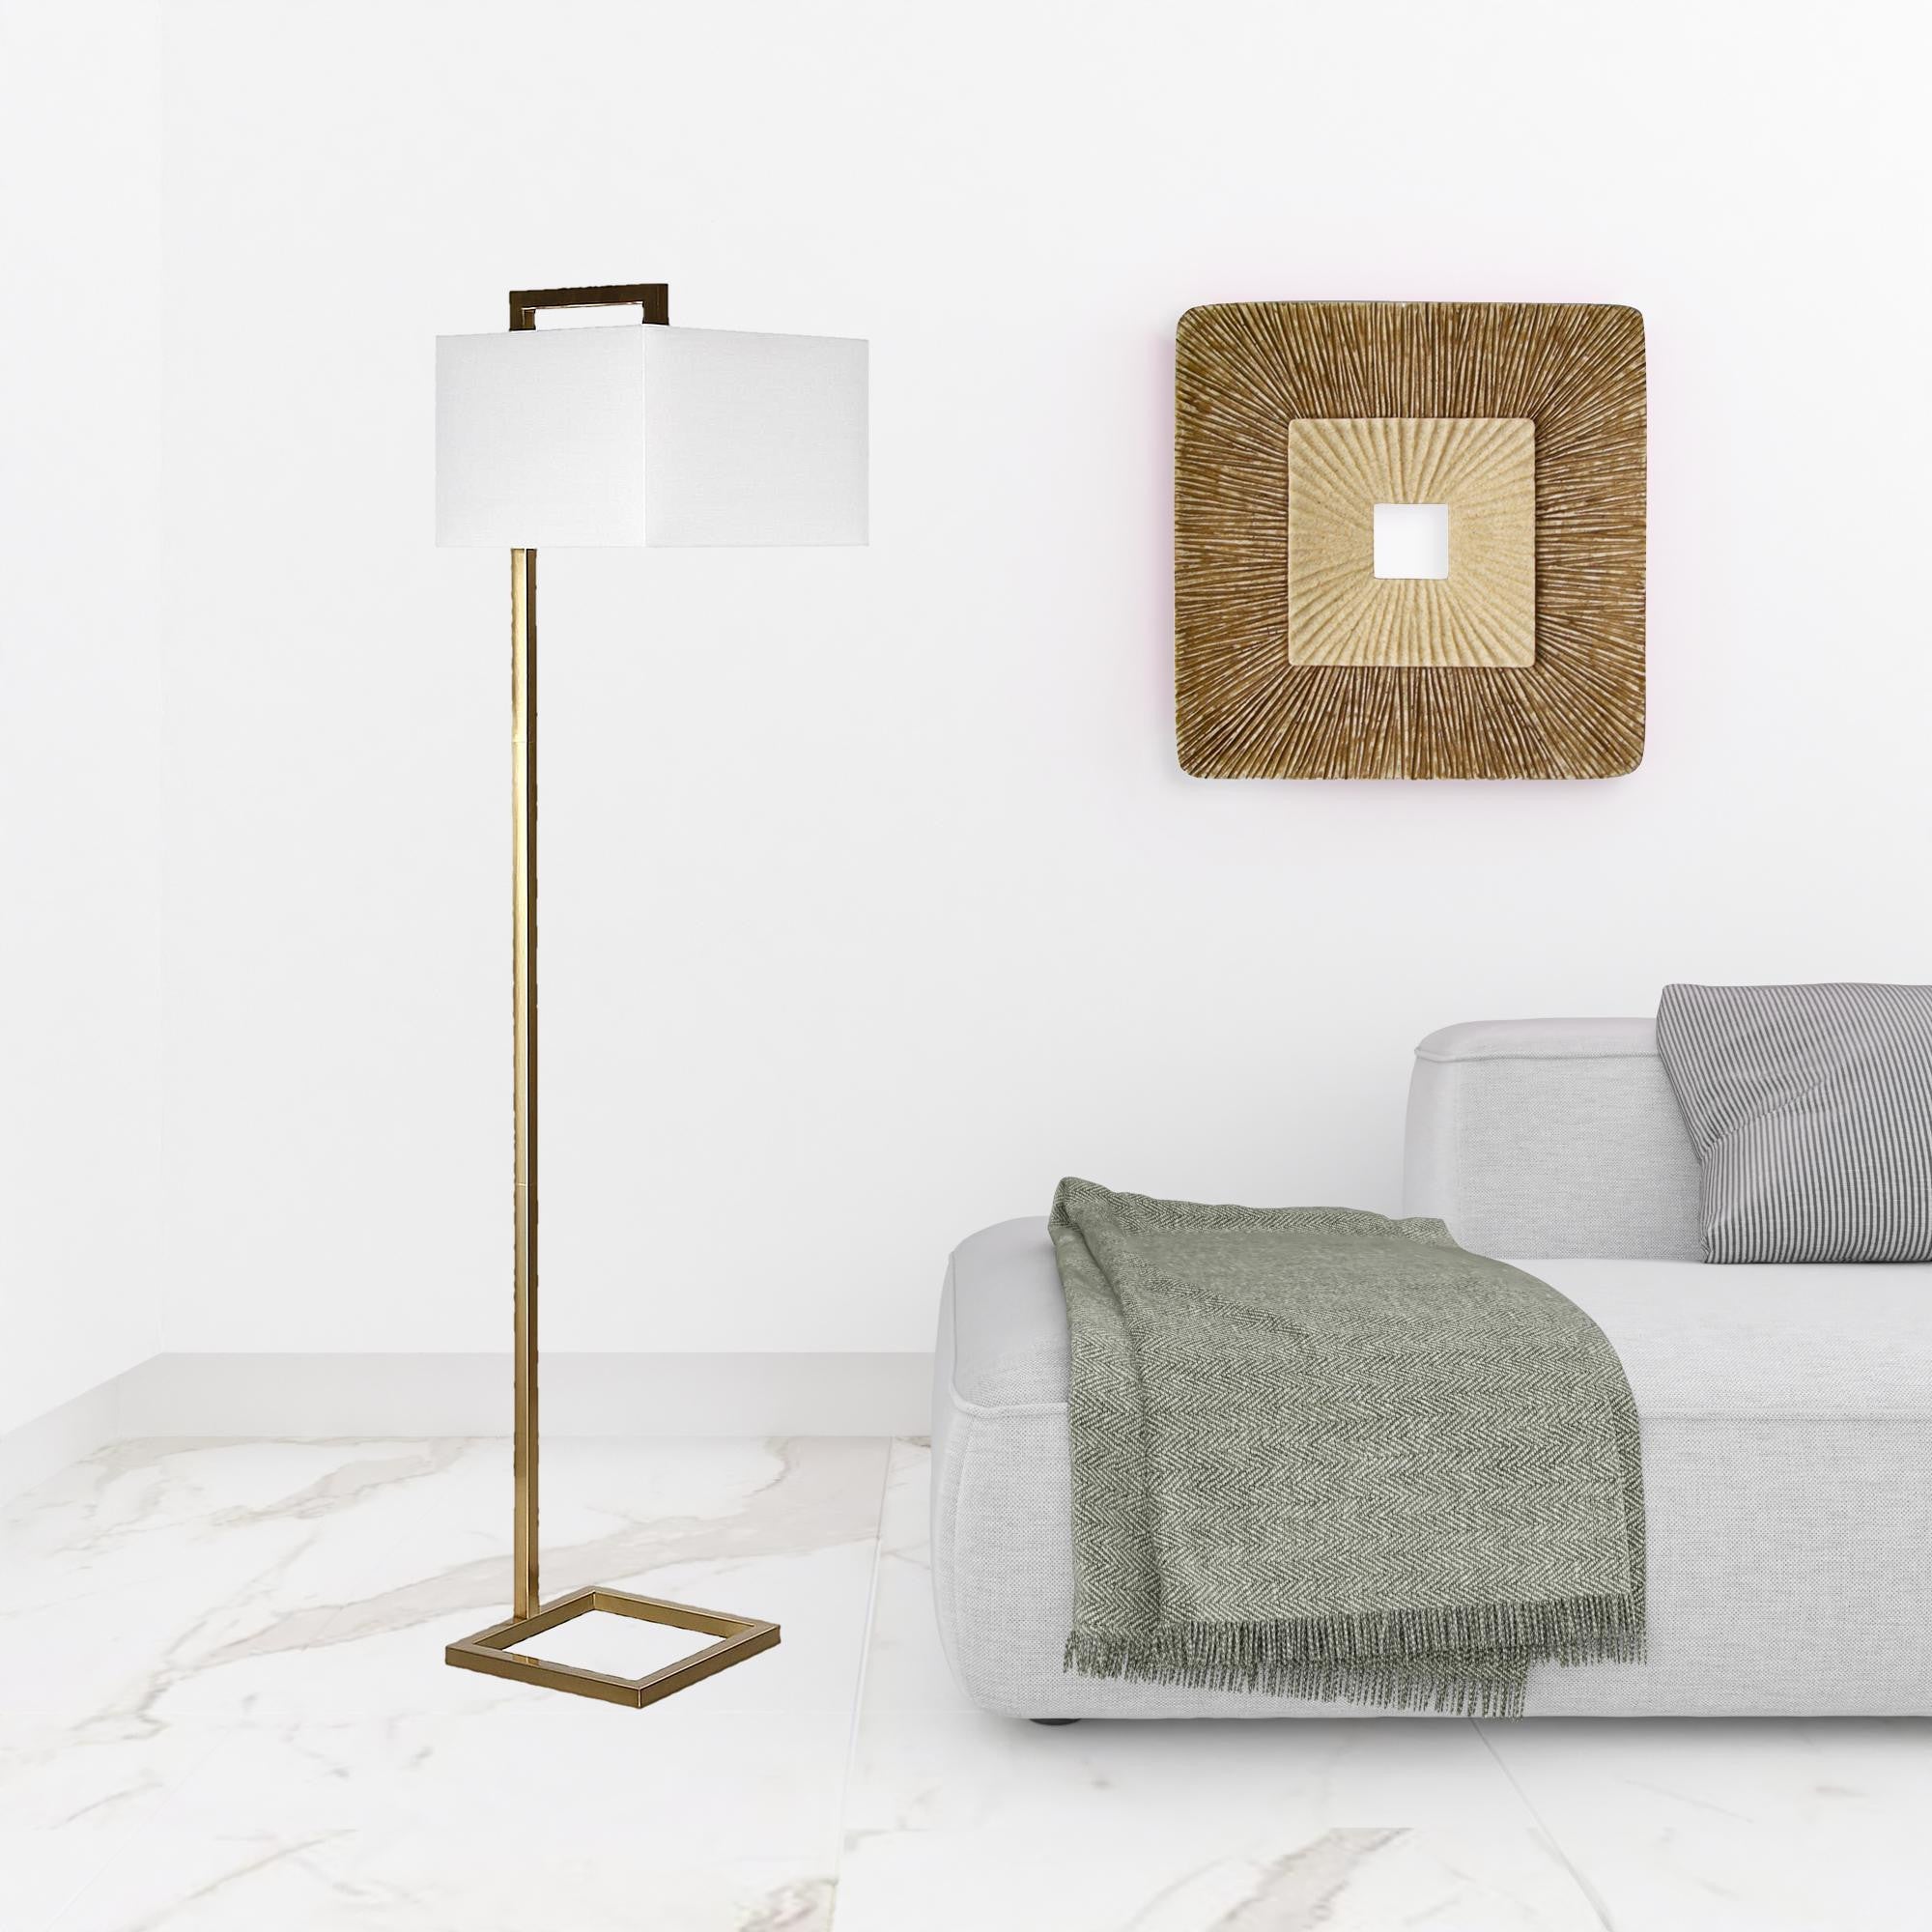 68" Brass Floor Lamp With White Frosted Glass Rectangular Shade